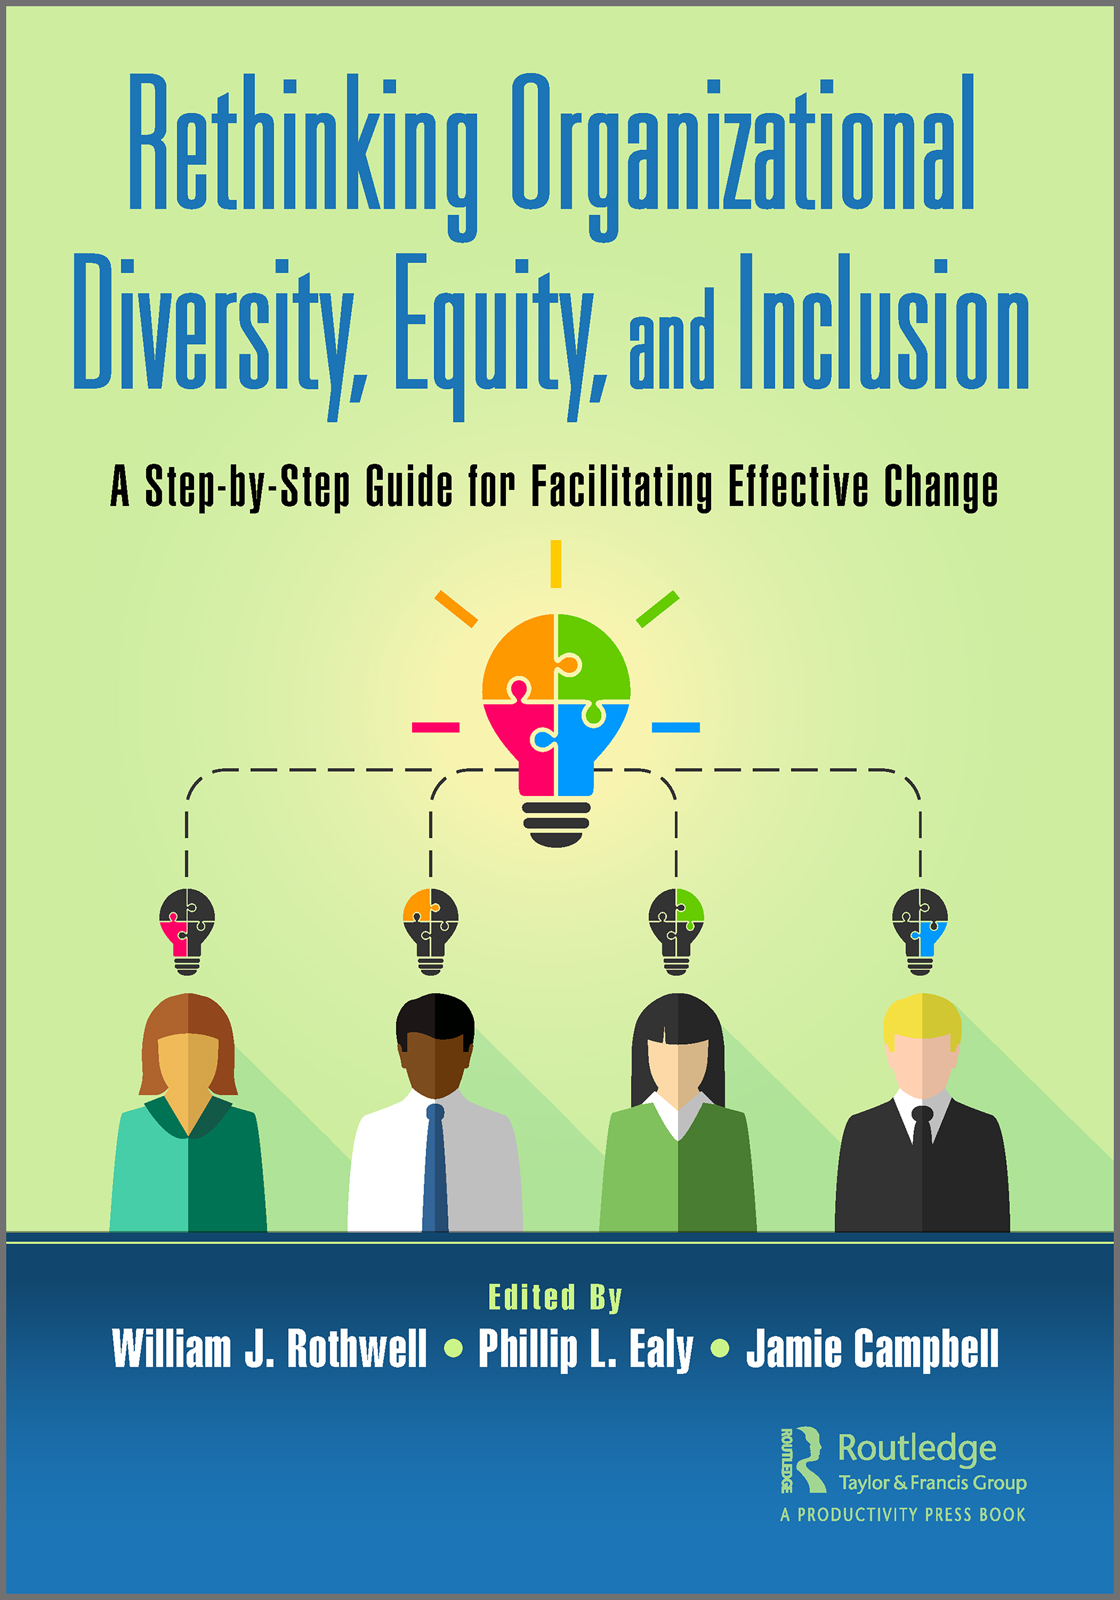 Rethinking Organizational Diversity, Equity, and Inclusion: A Step-by-Step Guide for Facilitating Effective Change